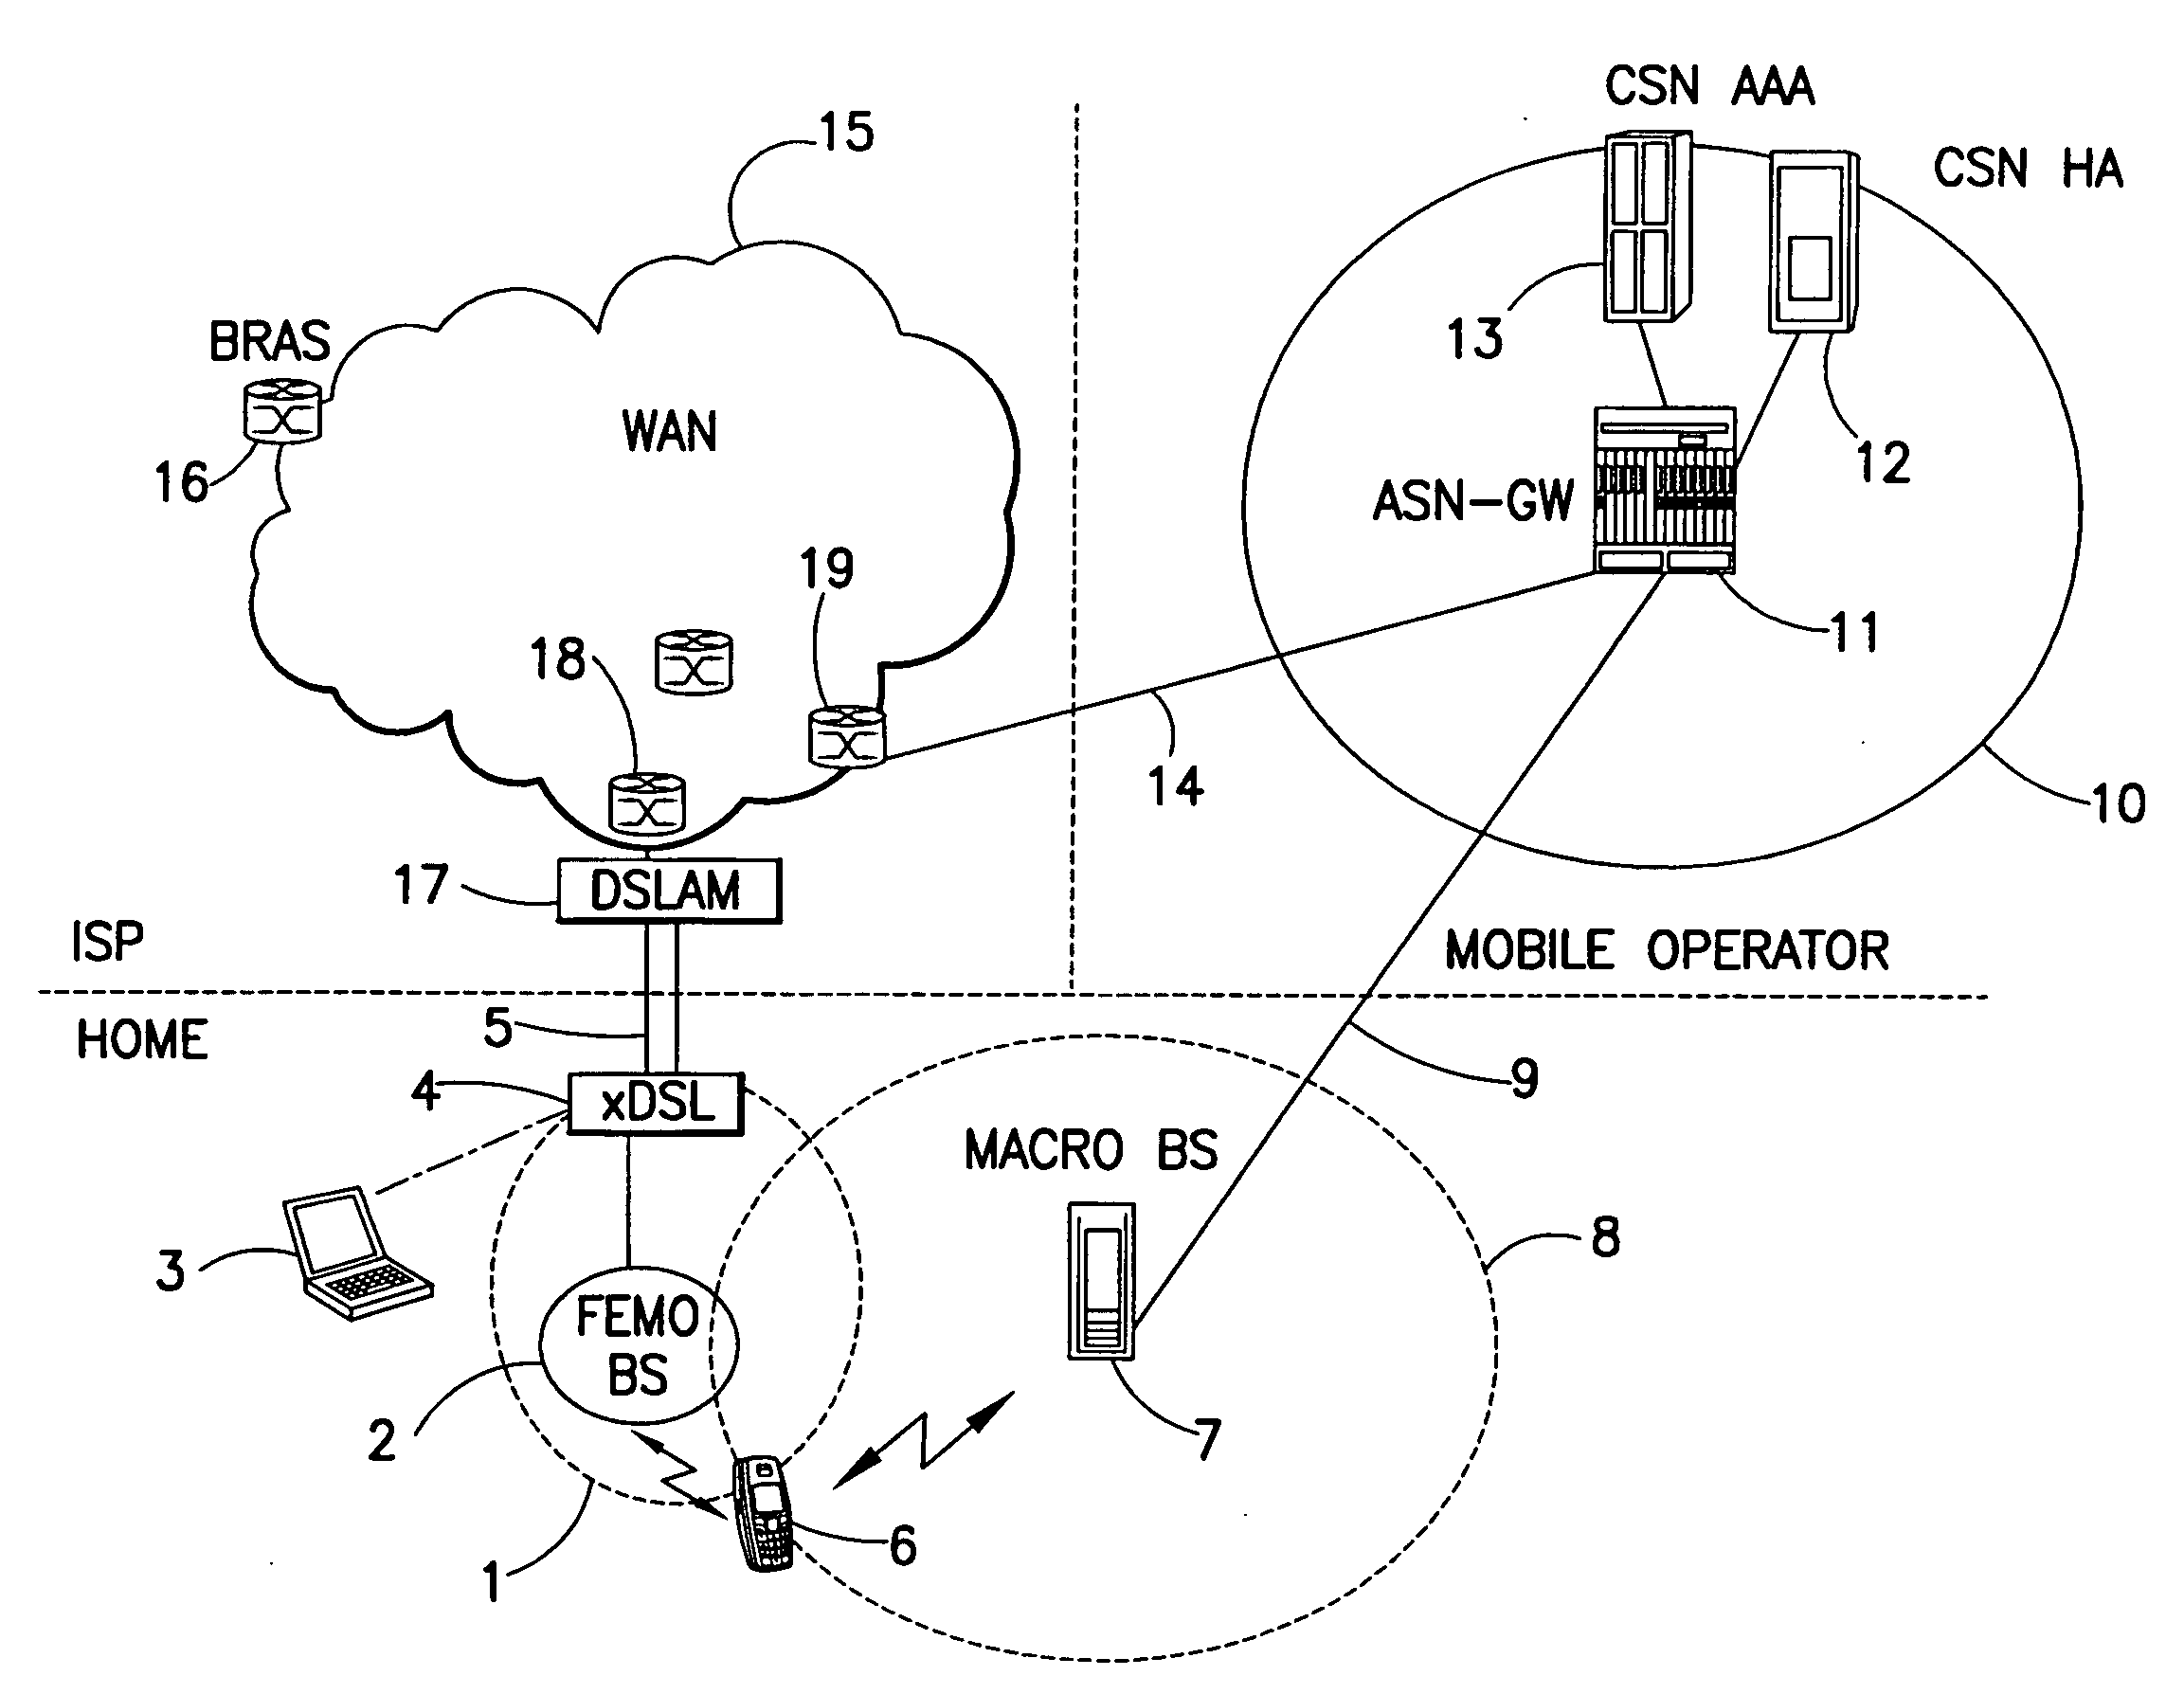 Method and apparatuses for mobile communication